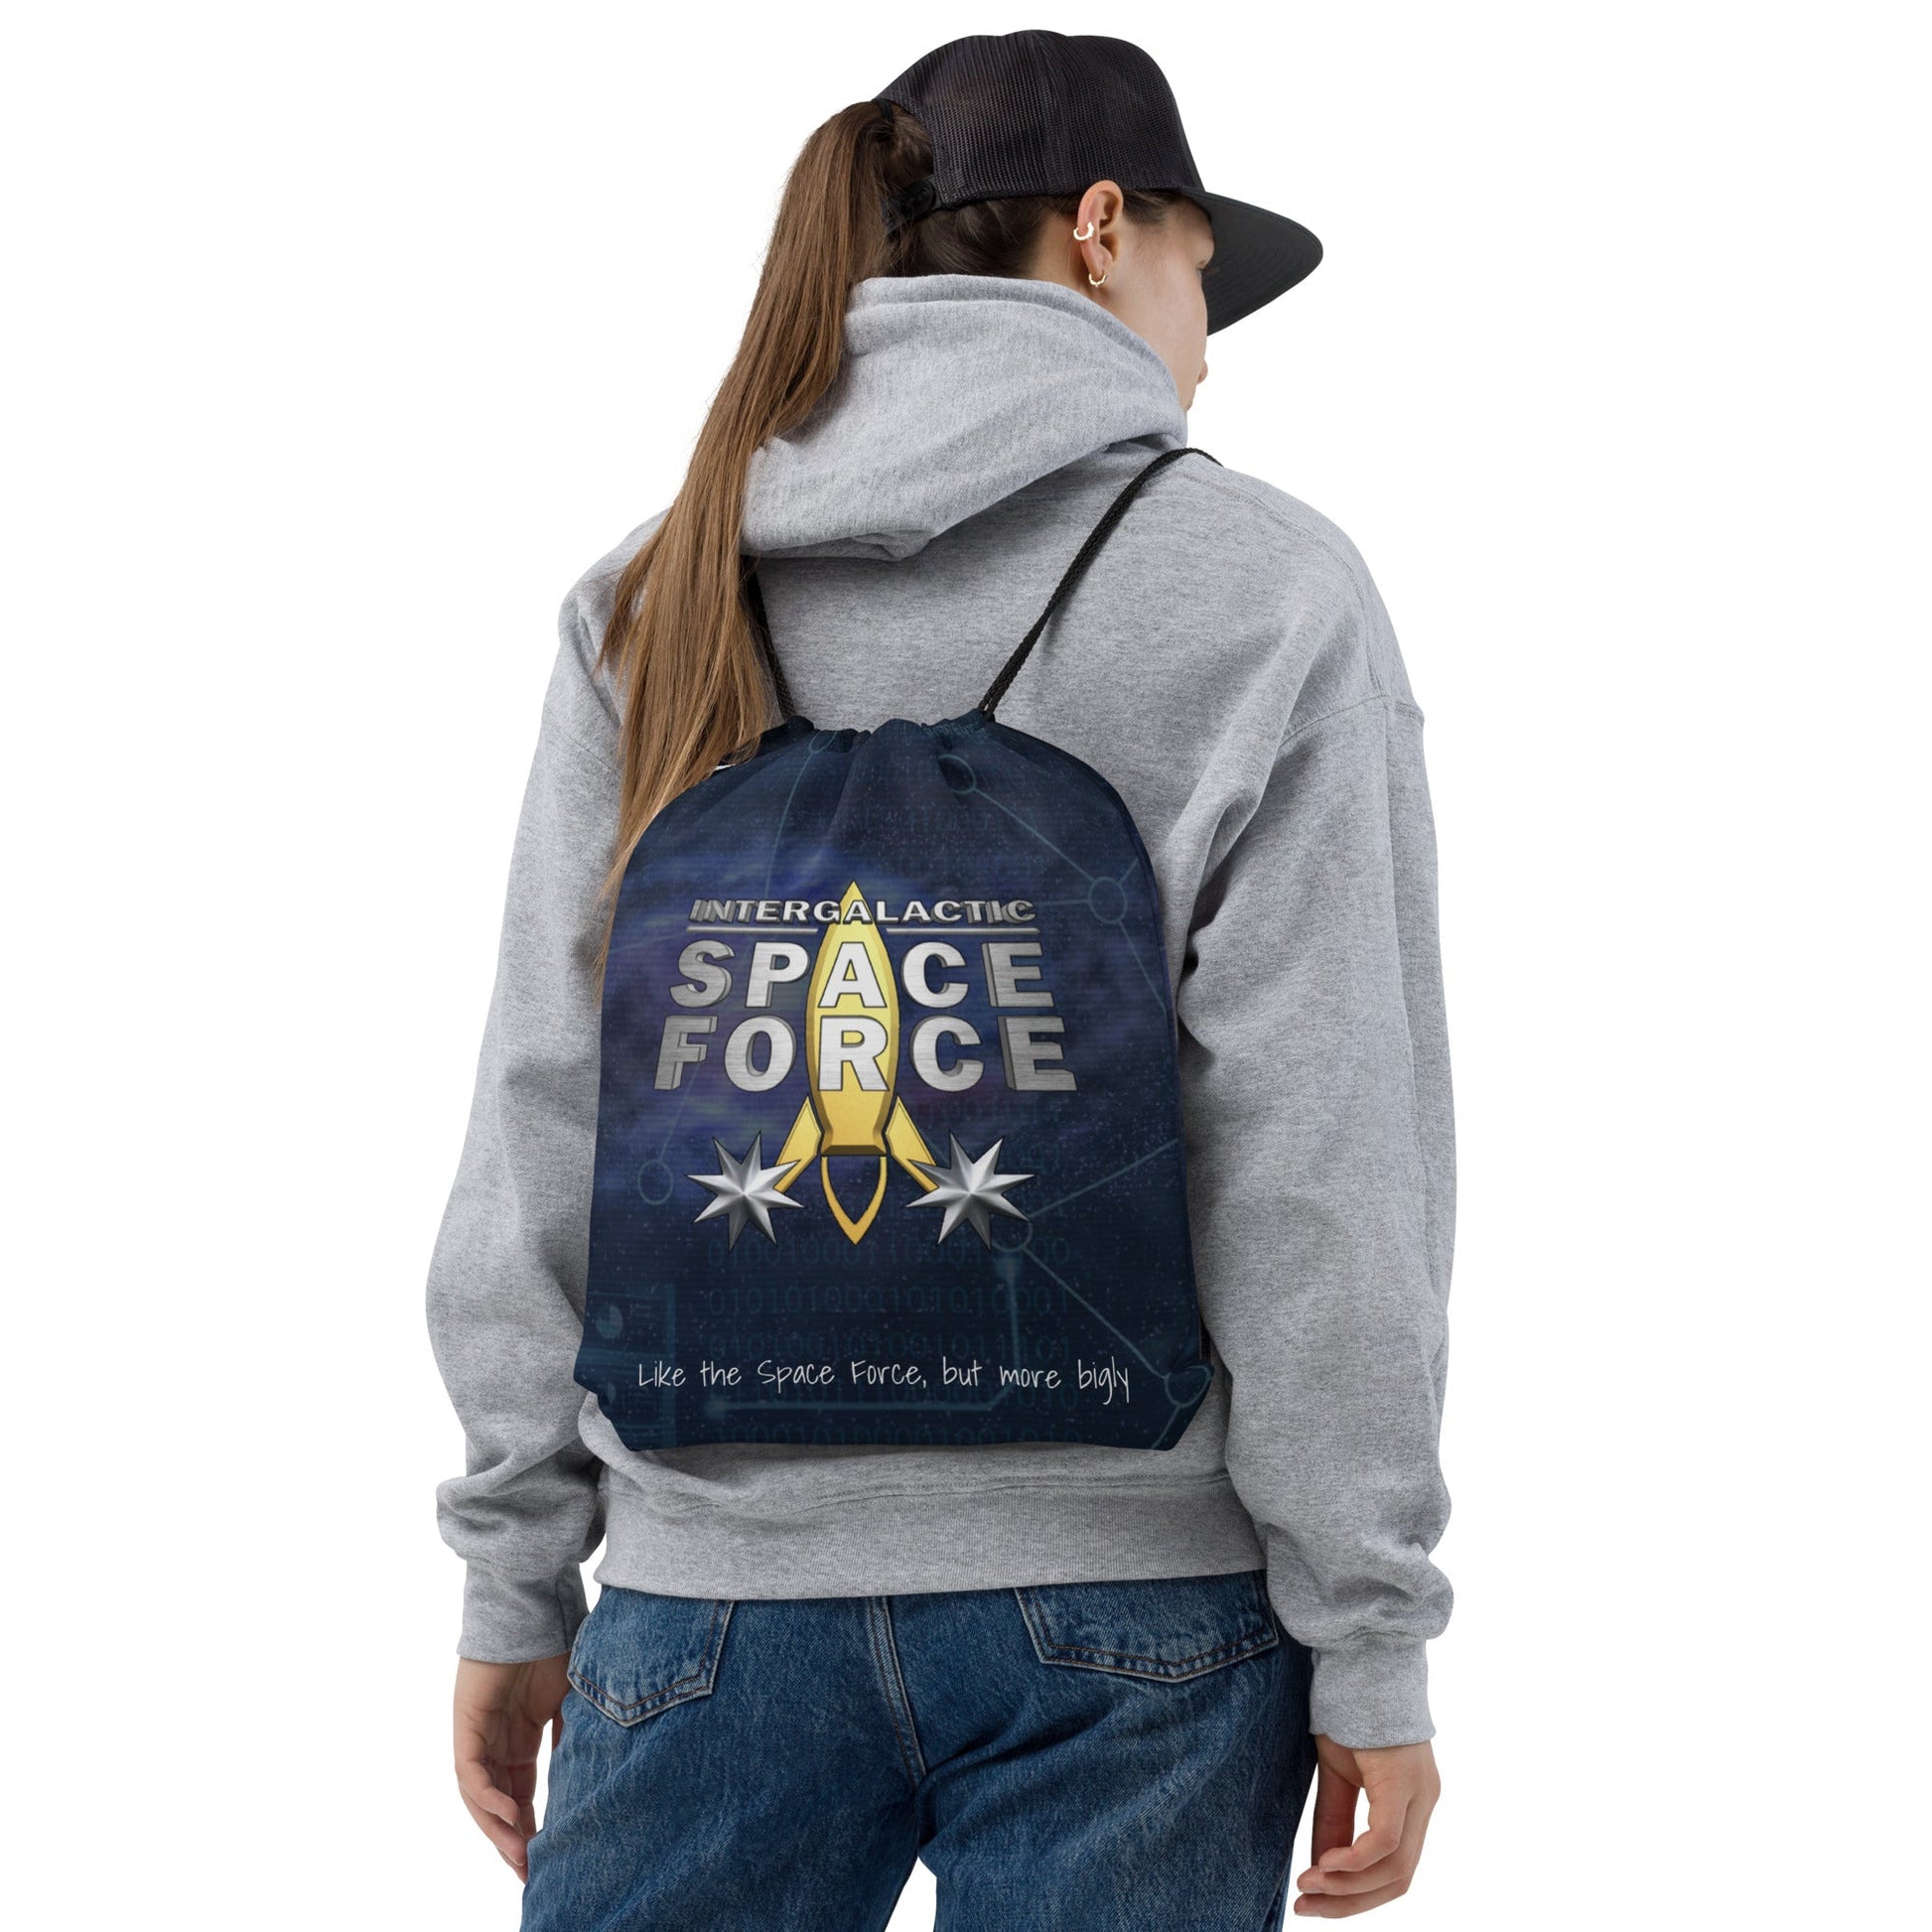 Drawstring bag | Intergalactic Space Force - Spectral Ink Shop - Luggage & Bags -8615858_8894